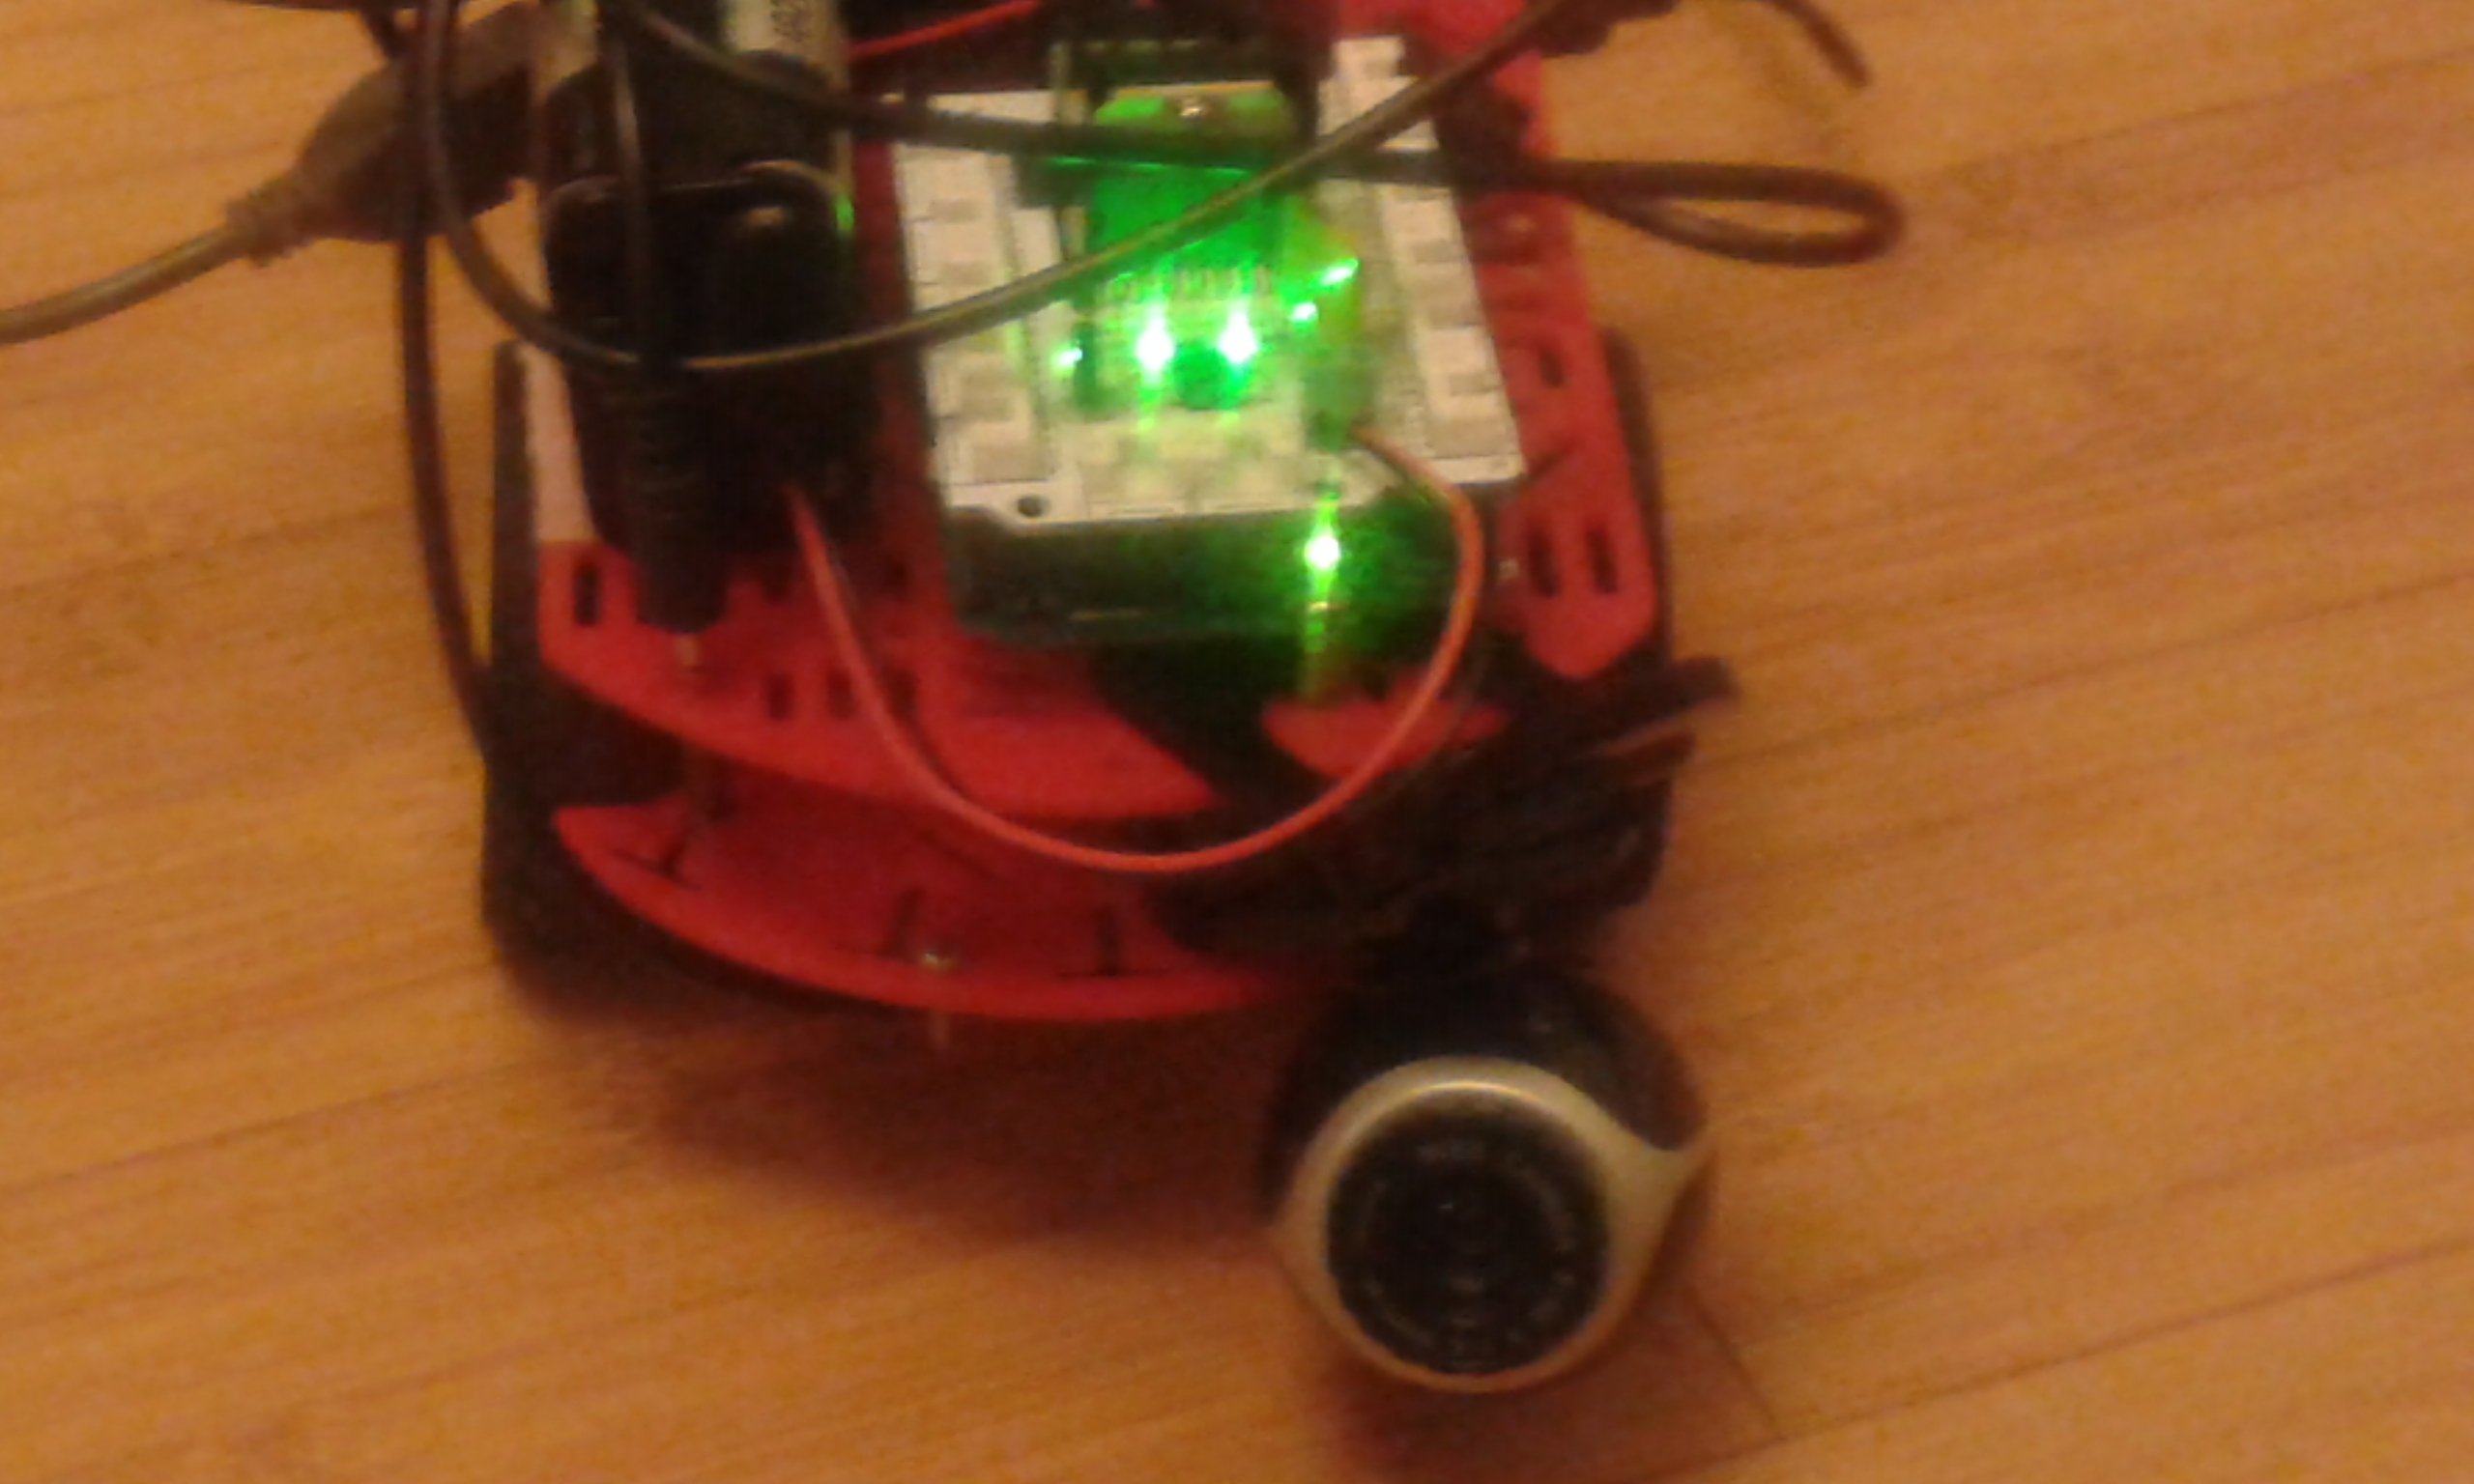 Rather blury view (I am not a photographer) of front mounted webcam as stated mounted upside down.